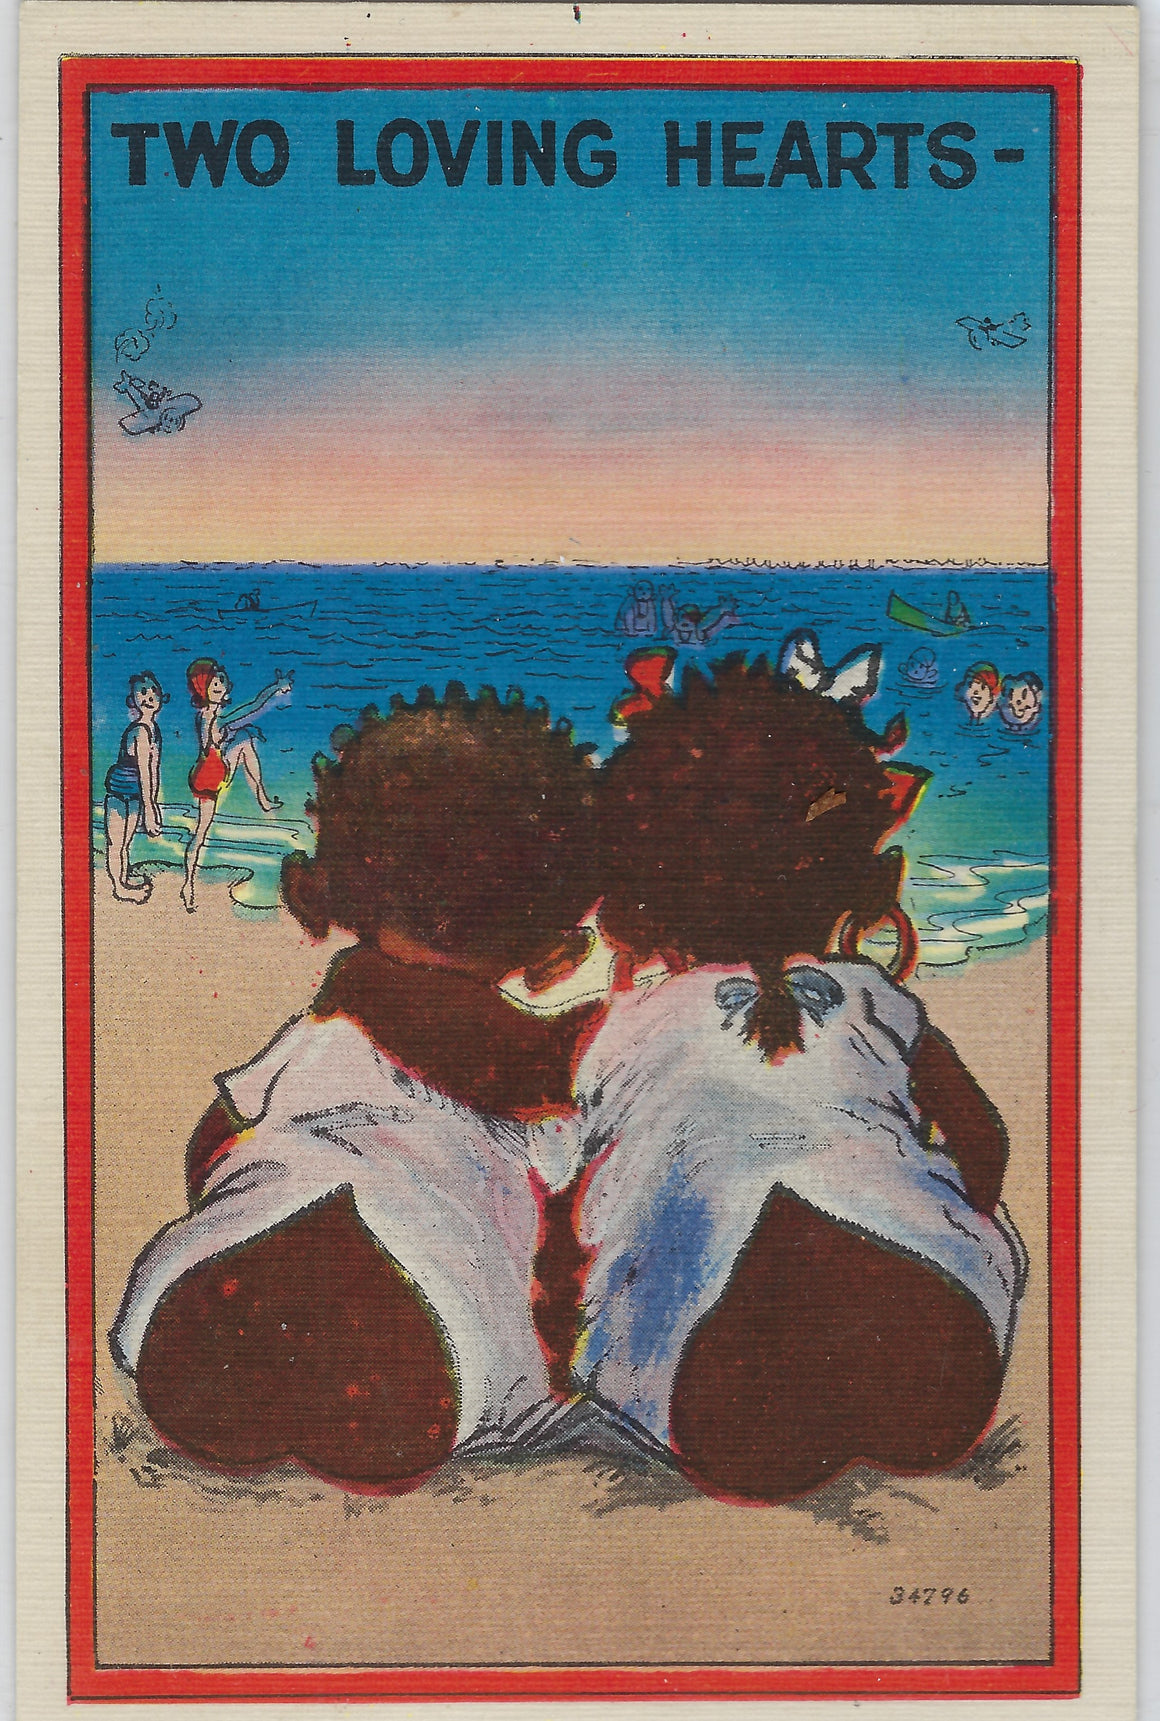 Vintage African American Black Americana Valentine's Day Cards